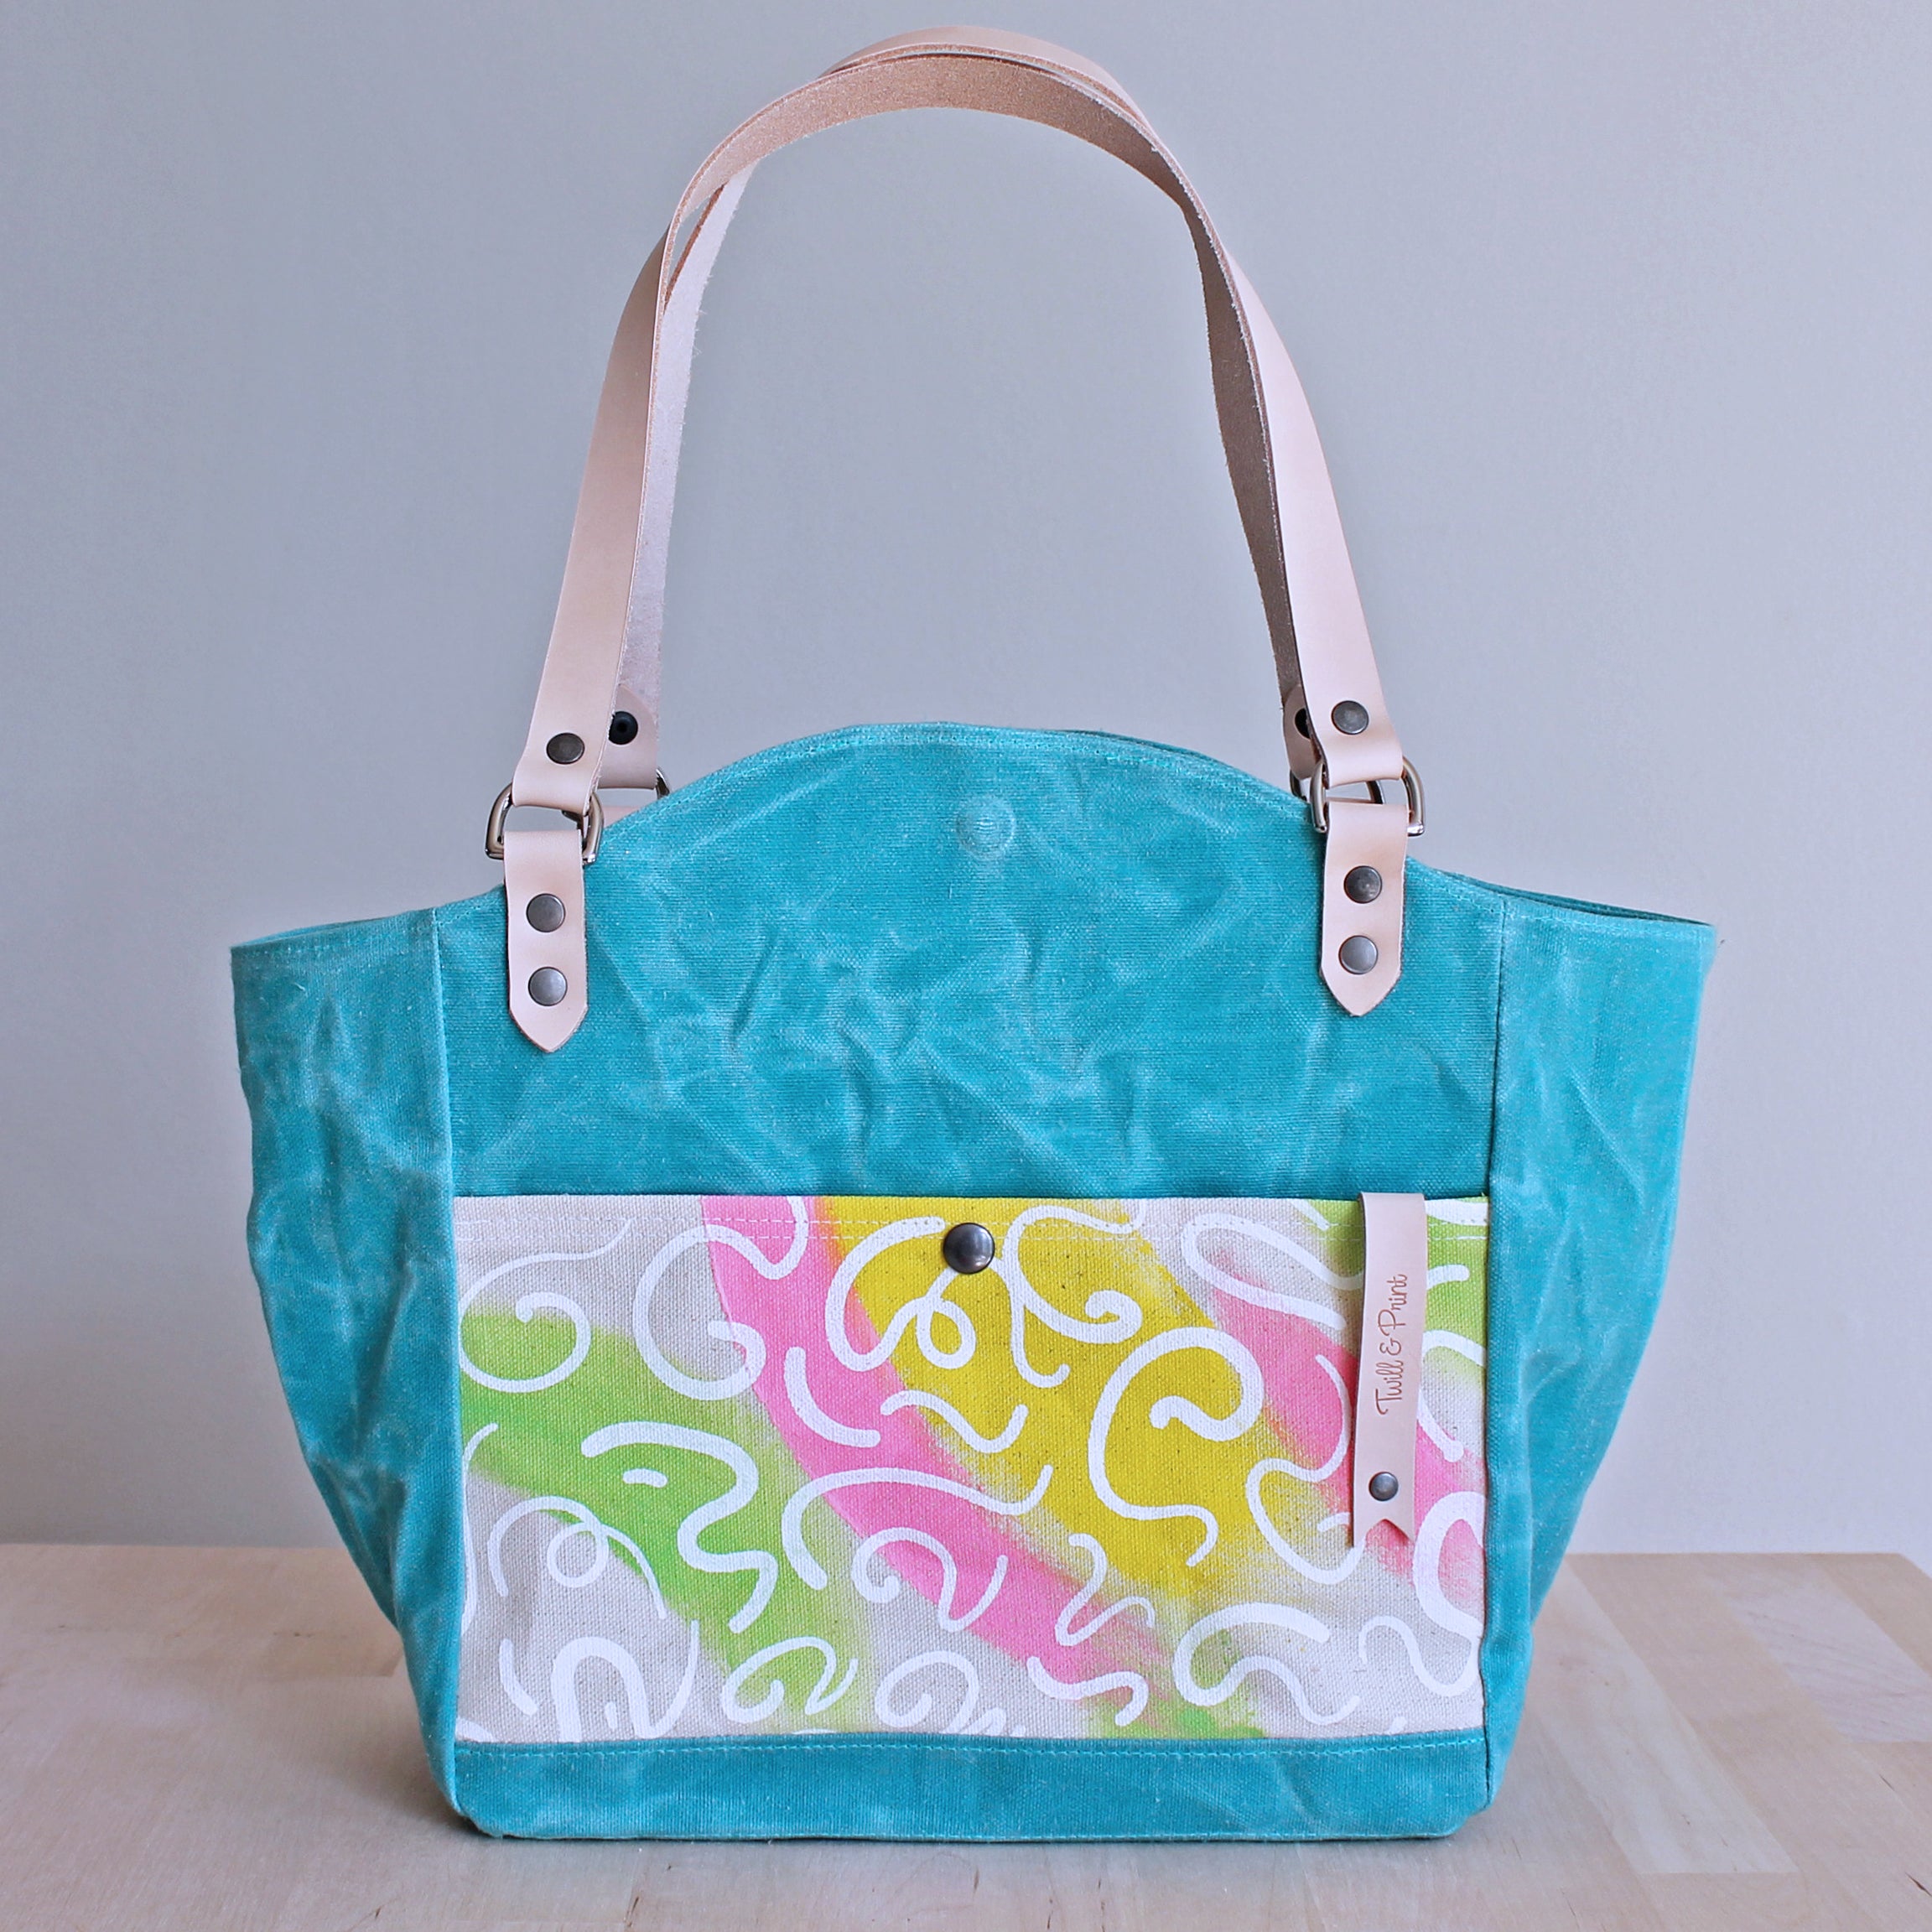 Special Edition Prints - Abettor Tote Bag (2 Styles)